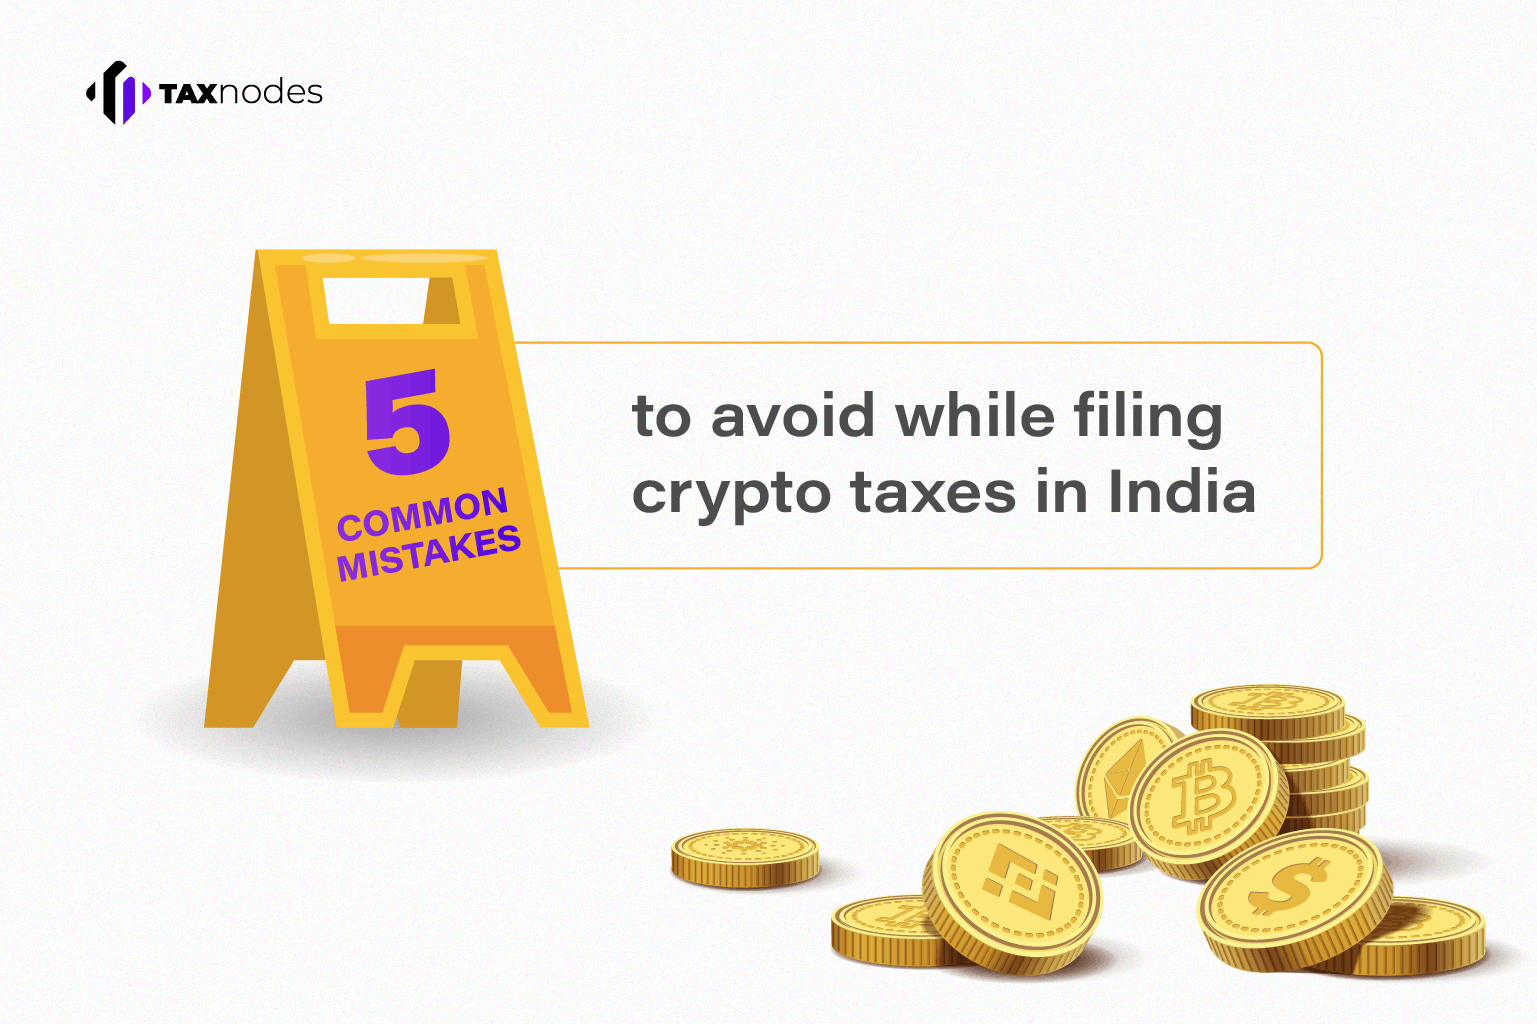 5 common mistakes to avoid while filing crypto taxes in India